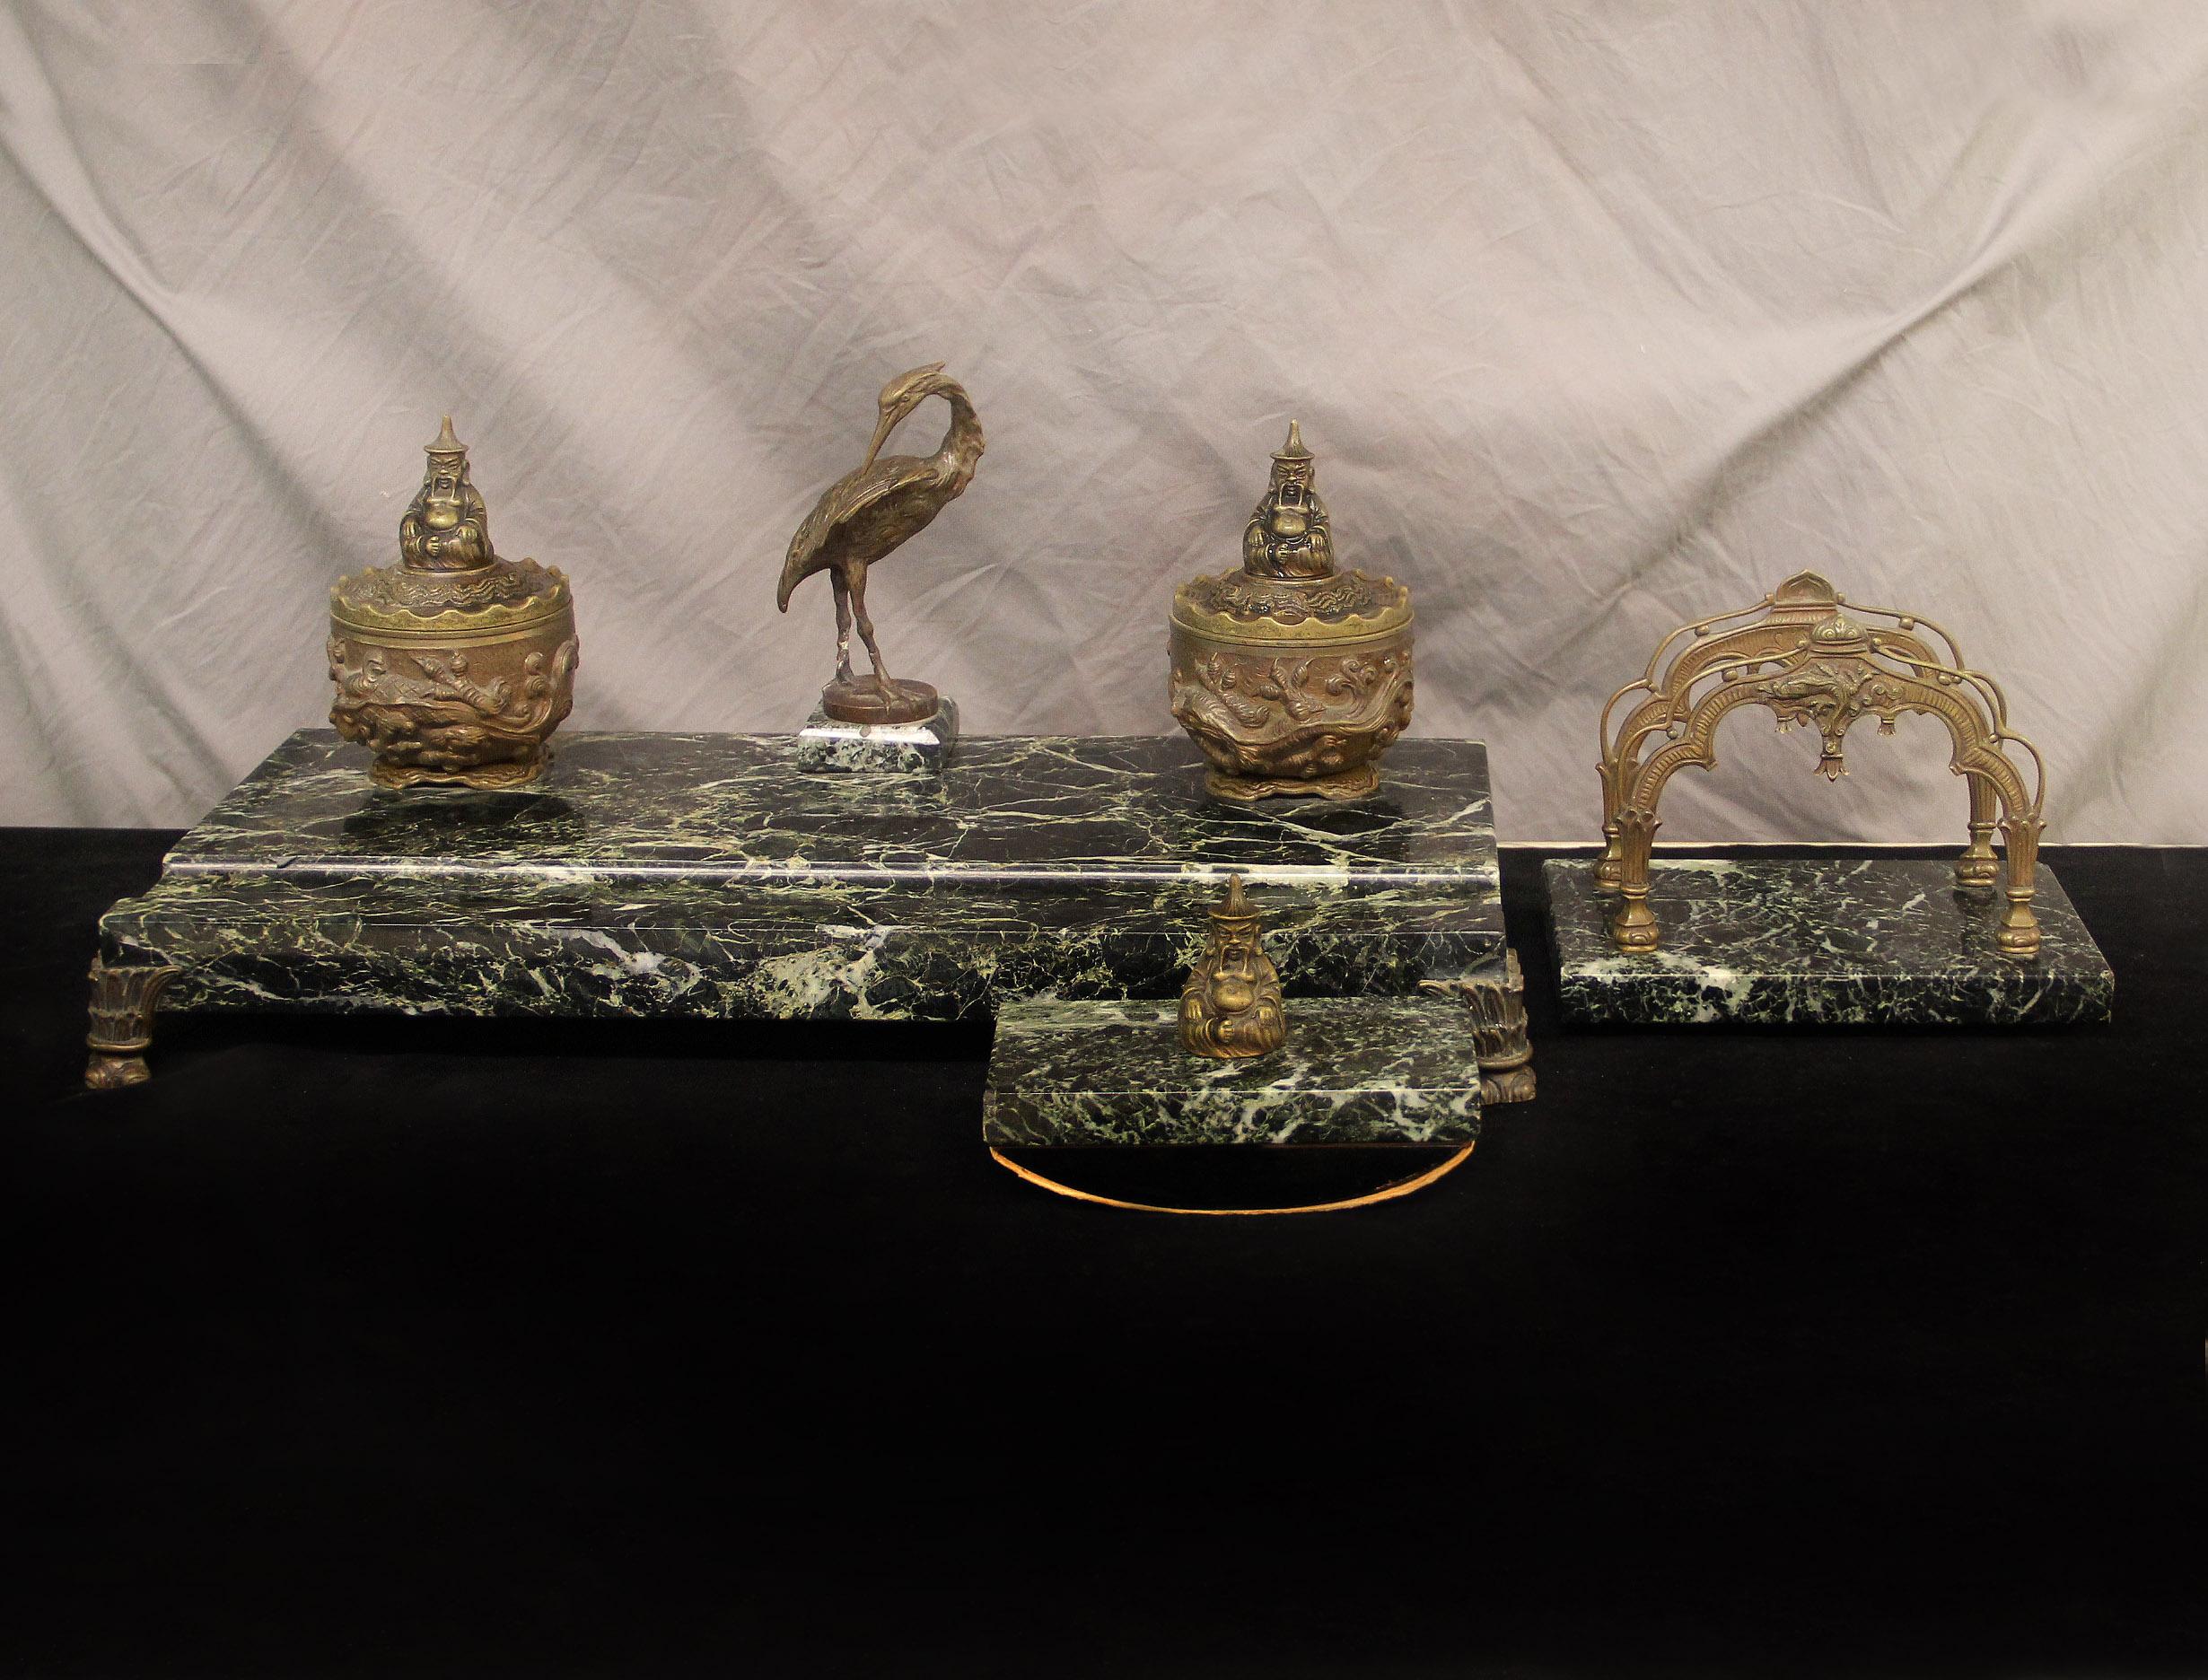 A very nice late 19th century bronze and marble 3 piece desk set.

The large Chinese designed rectangular desk set centered with a bronze crane and two decorated ink holders on either side, sitting on a green marble base and bronze feet, the set